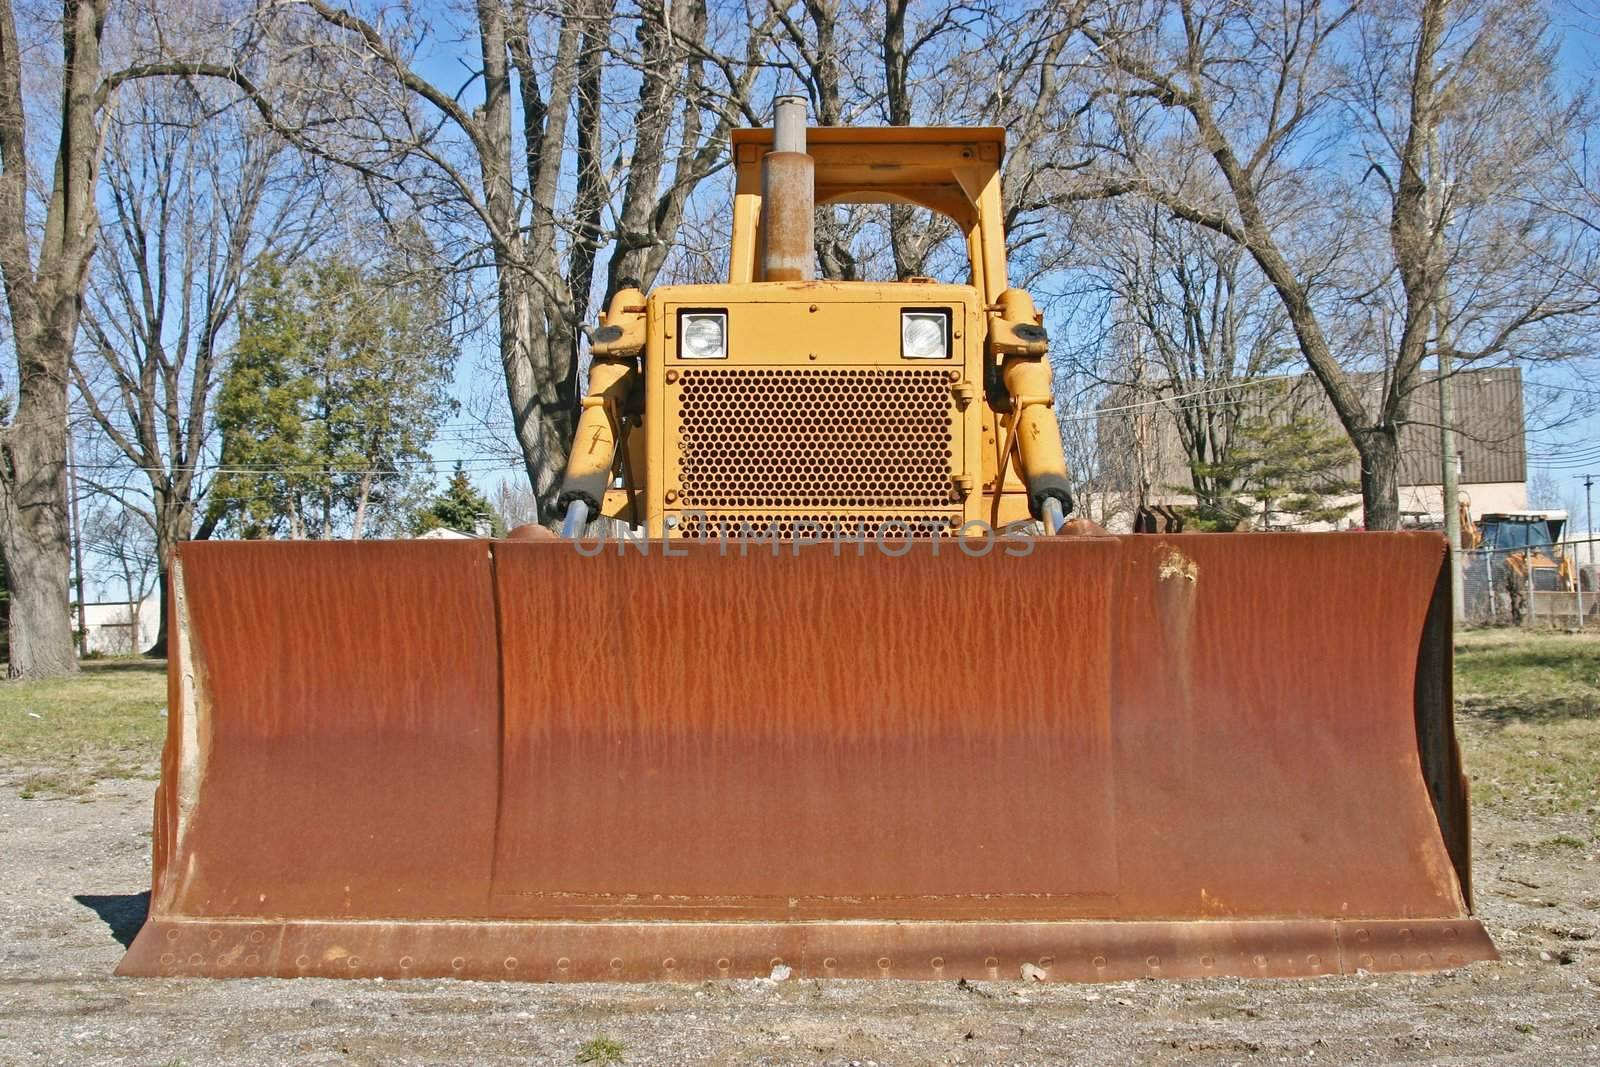 Old Dozer front view by dtouch1